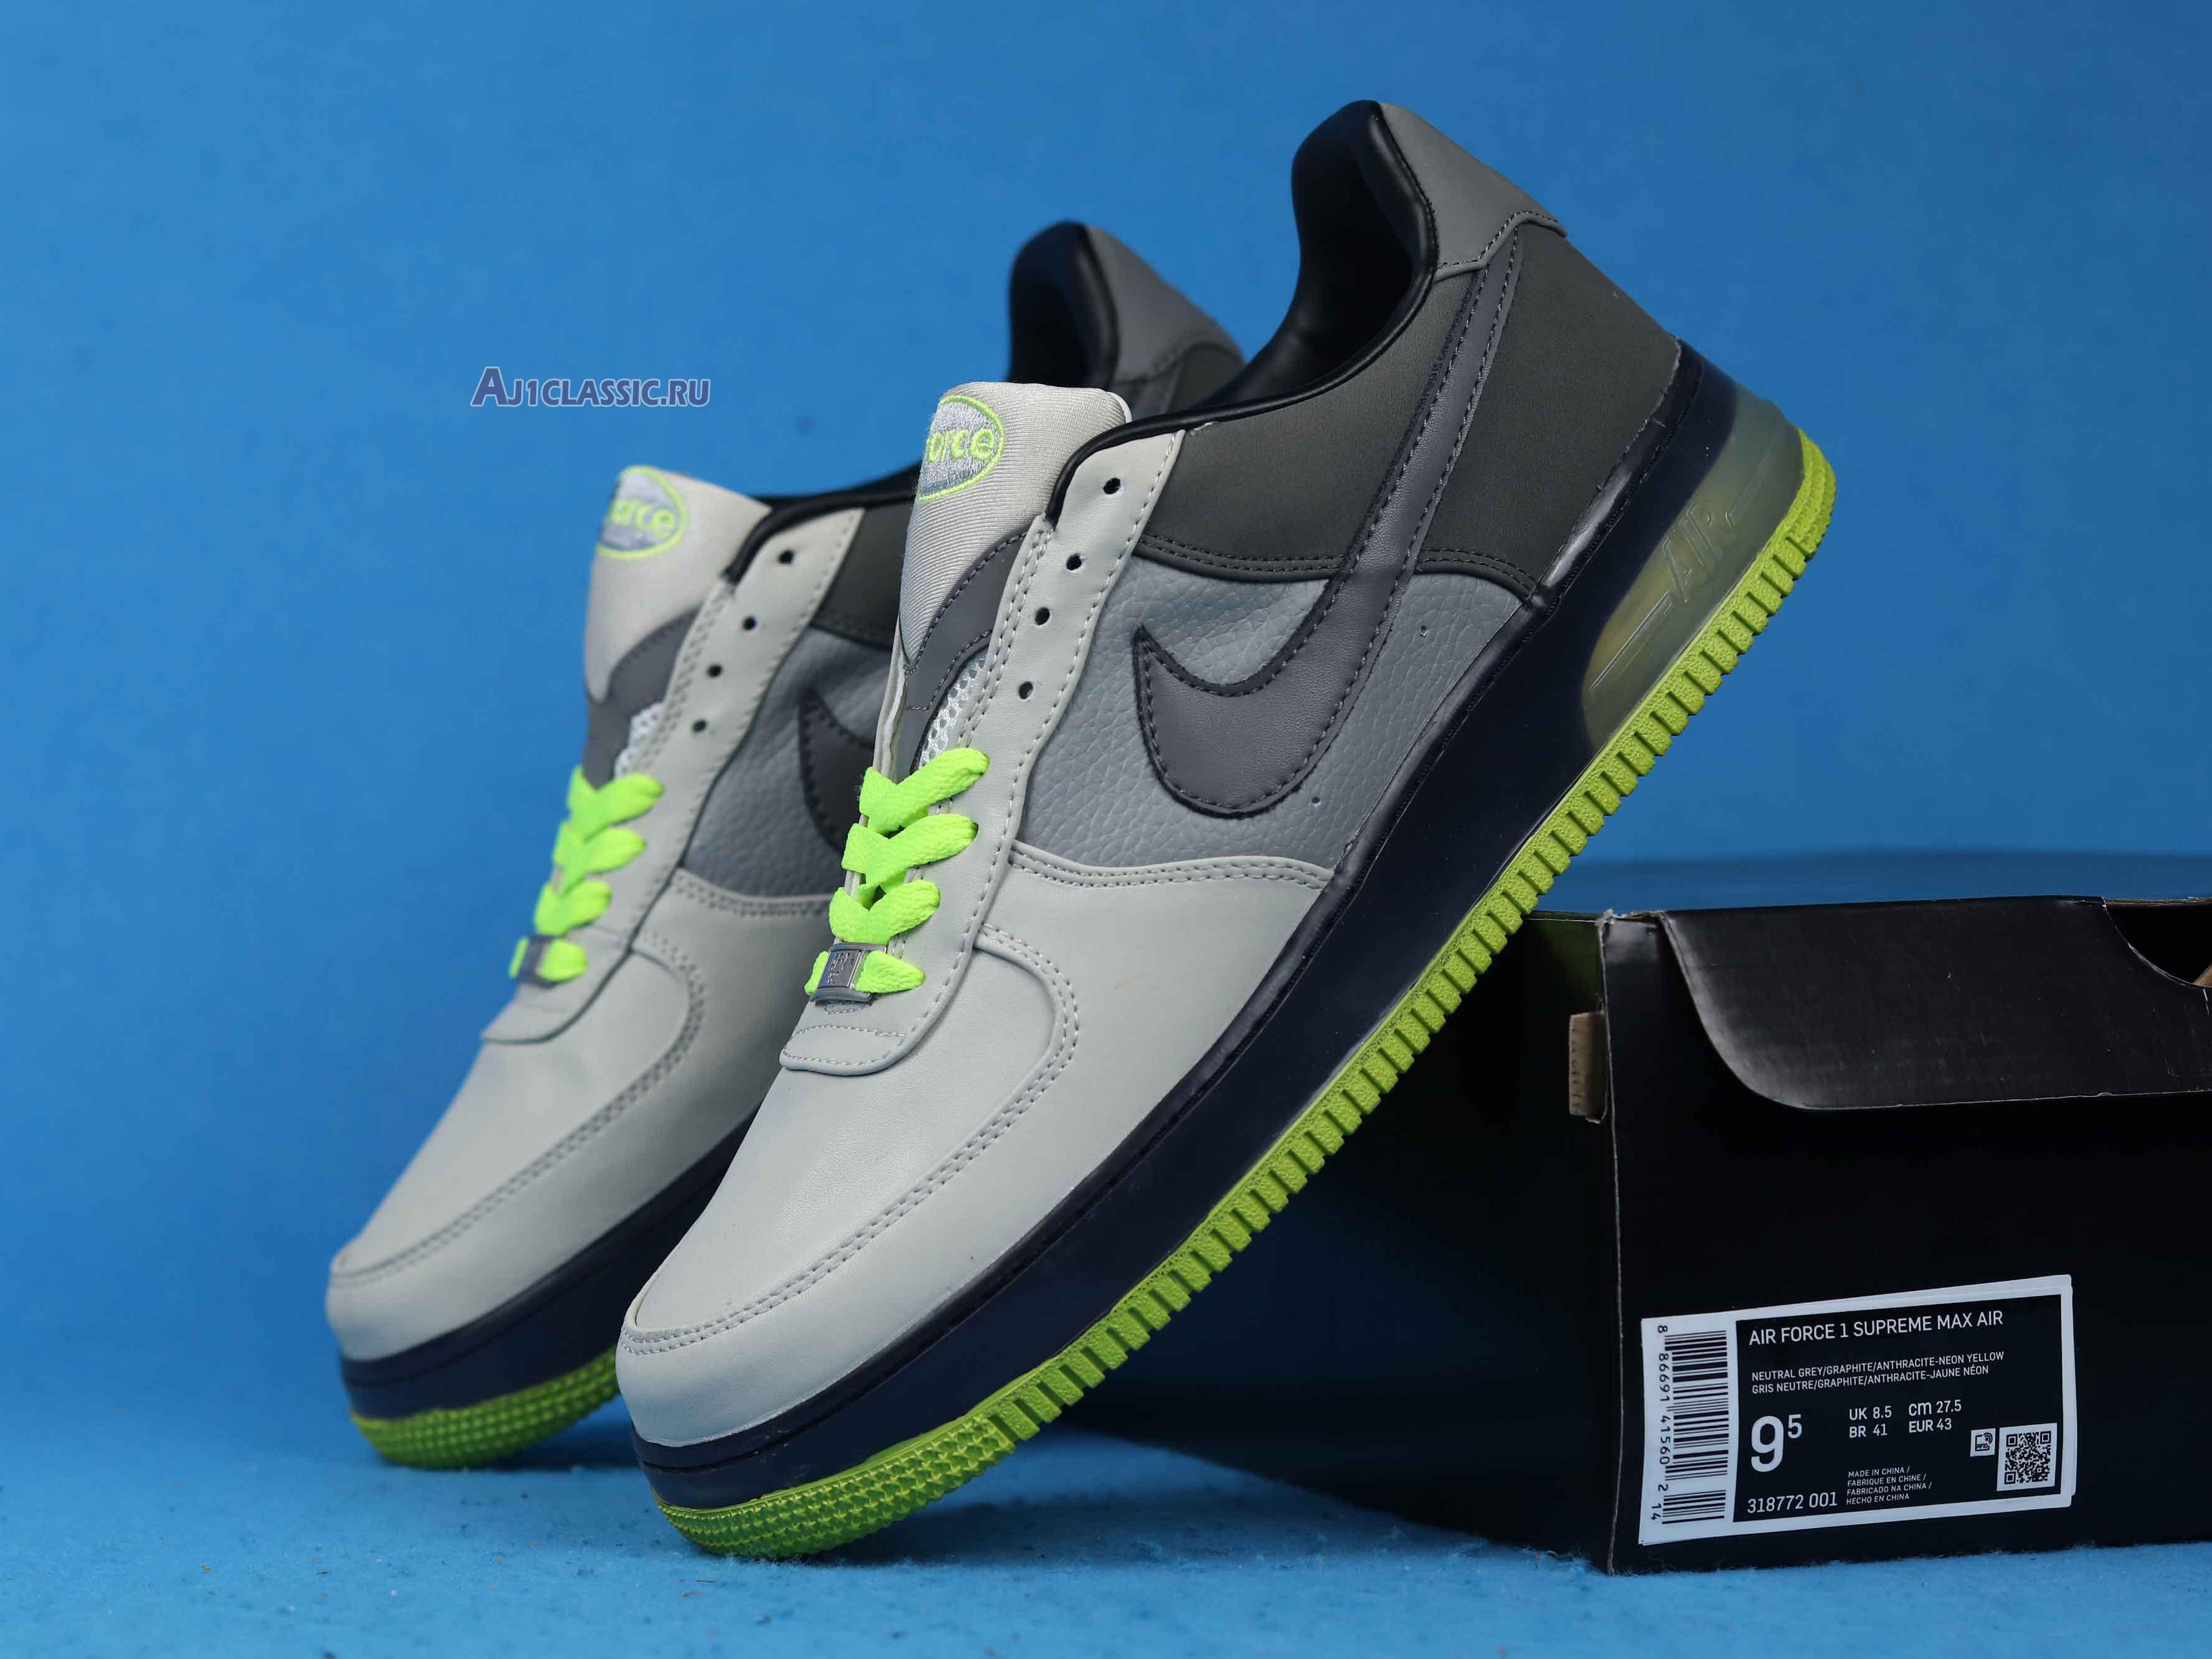 Nike Air Force 1 Supreme Max Air Air Max 95 318772-001 Neutral Grey/Graphite/Anthracite-Neon Yellow Sneakers